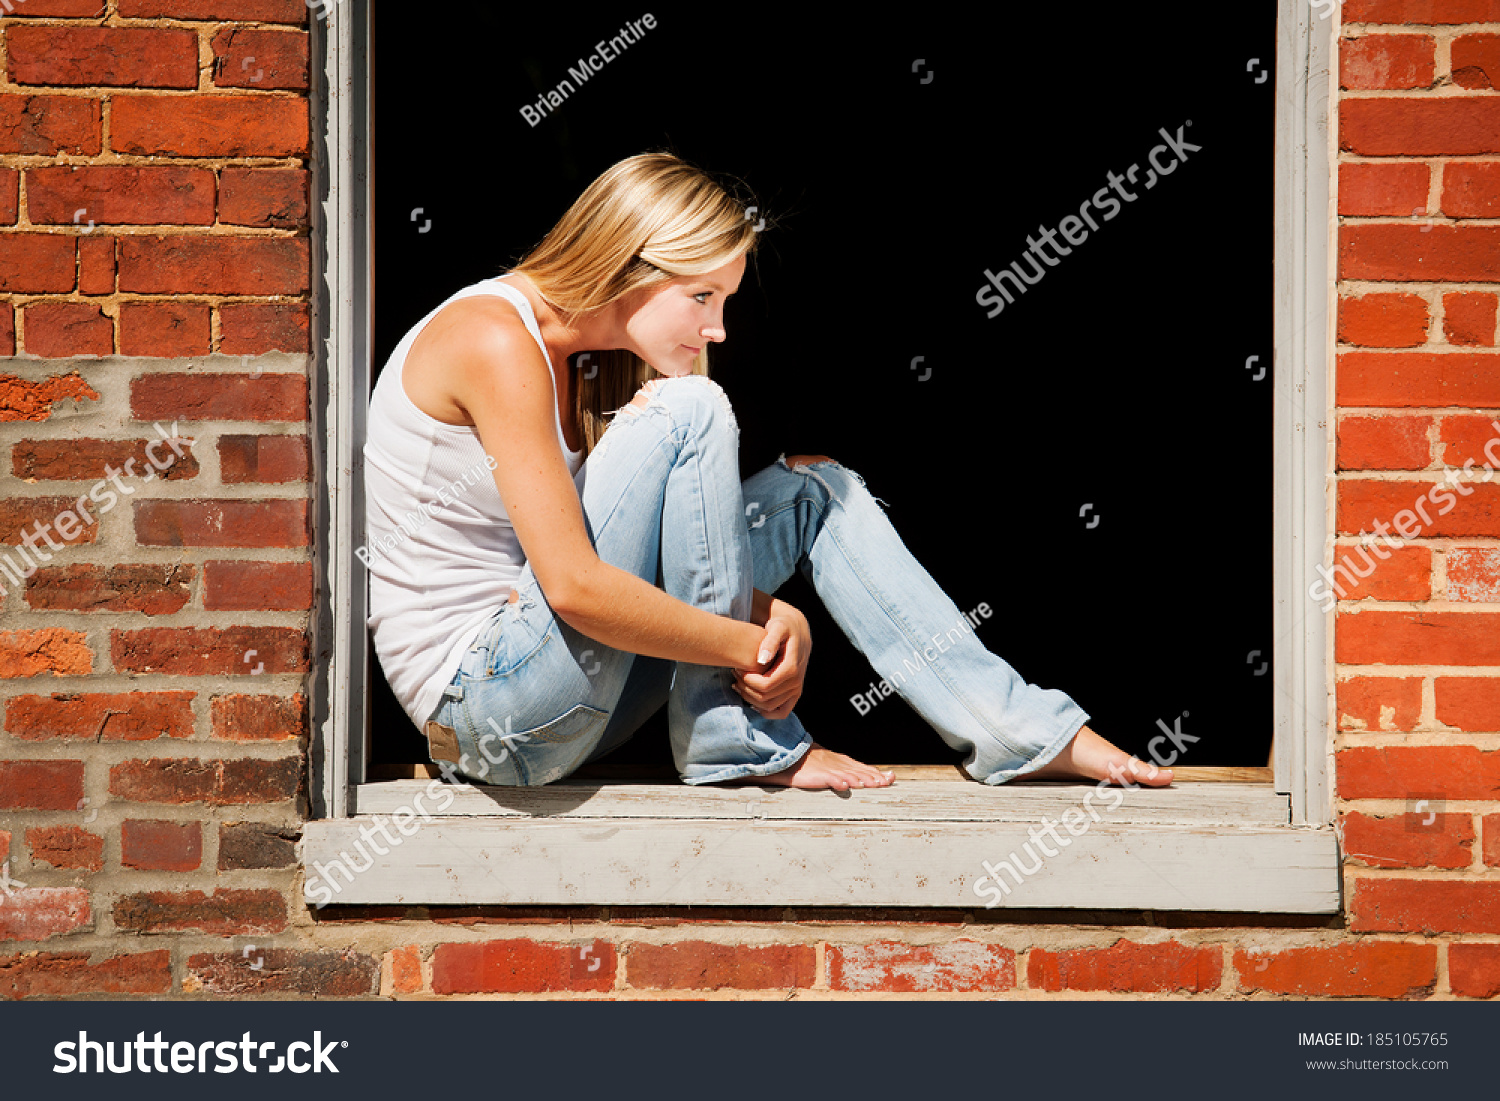 https://image.shutterstock.com/shutterstock/photos/185105765/display_1500/stock-photo-beautiful-young-woman-sits-on-window-ledge-of-abandoned-brick-building-185105765.jpg